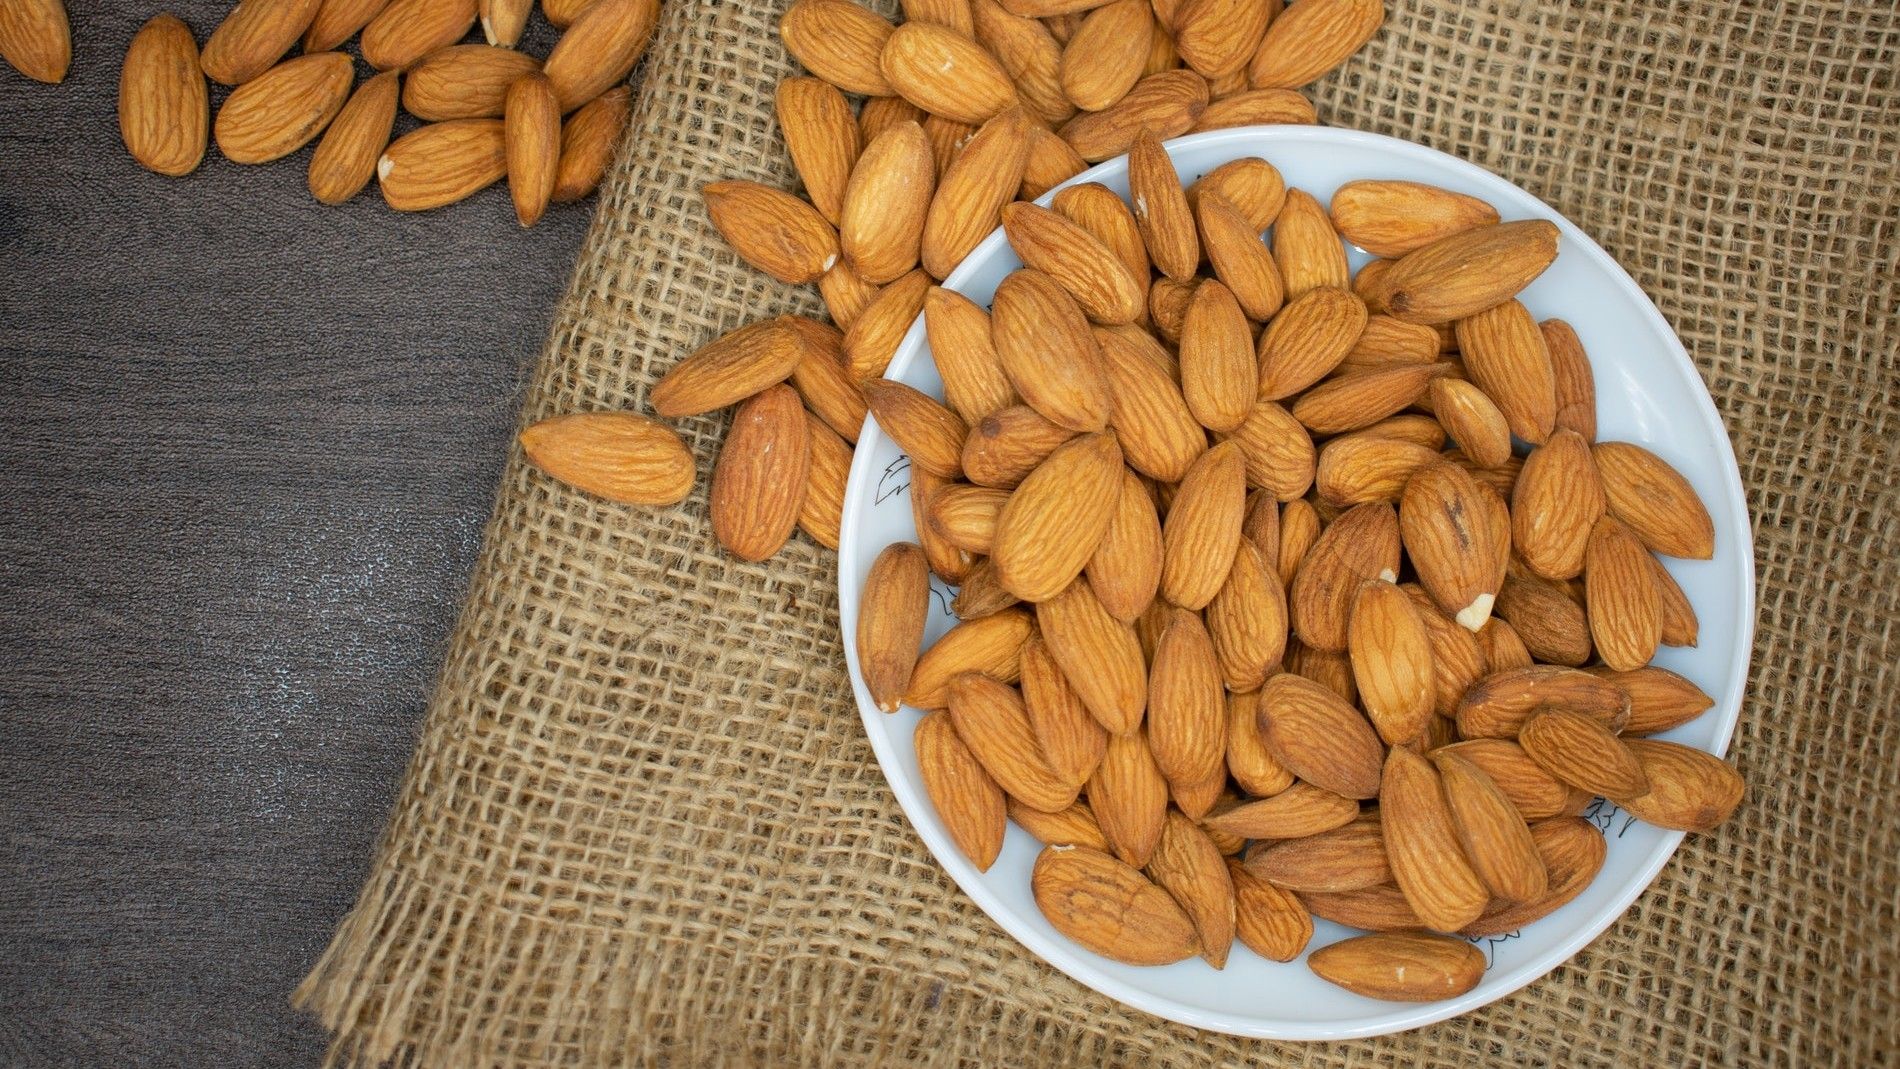 <p>                     Almonds aren’t just a good, low-fat source of protein that can help to stabilize blood sugar as part of a balanced diet. It also contains magnesium, tryptophan, an amino acid that plays a central role in the production of serotonin, and large amounts of melatonin. <a href="https://go.redirectingat.com/?id=92X148&xcust=t3_gb_2213869009478467600&xs=1&url=https%3A%2F%2Flink.springer.com%2Farticle%2F10.1007%2Fs11418-015-0958-9&sref=https%3A%2F%2Fwww.t3.com%2Ffeatures%2Ffoods-to-help-you-sleep">One study</a> found that feeding rats 400mg of almond extract led to them sleeping longer and more deeply.                   </p>                                      <p>                     If you do crave a late-night snack, then, almonds are a far better choice than sugary or fatty alternatives. If you’re not a fan though, other nuts such as walnuts, pistachios and cashews have similar qualities, as do seeds such as flax seeds, pumpkin seeds, and sunflower seeds.                   </p>